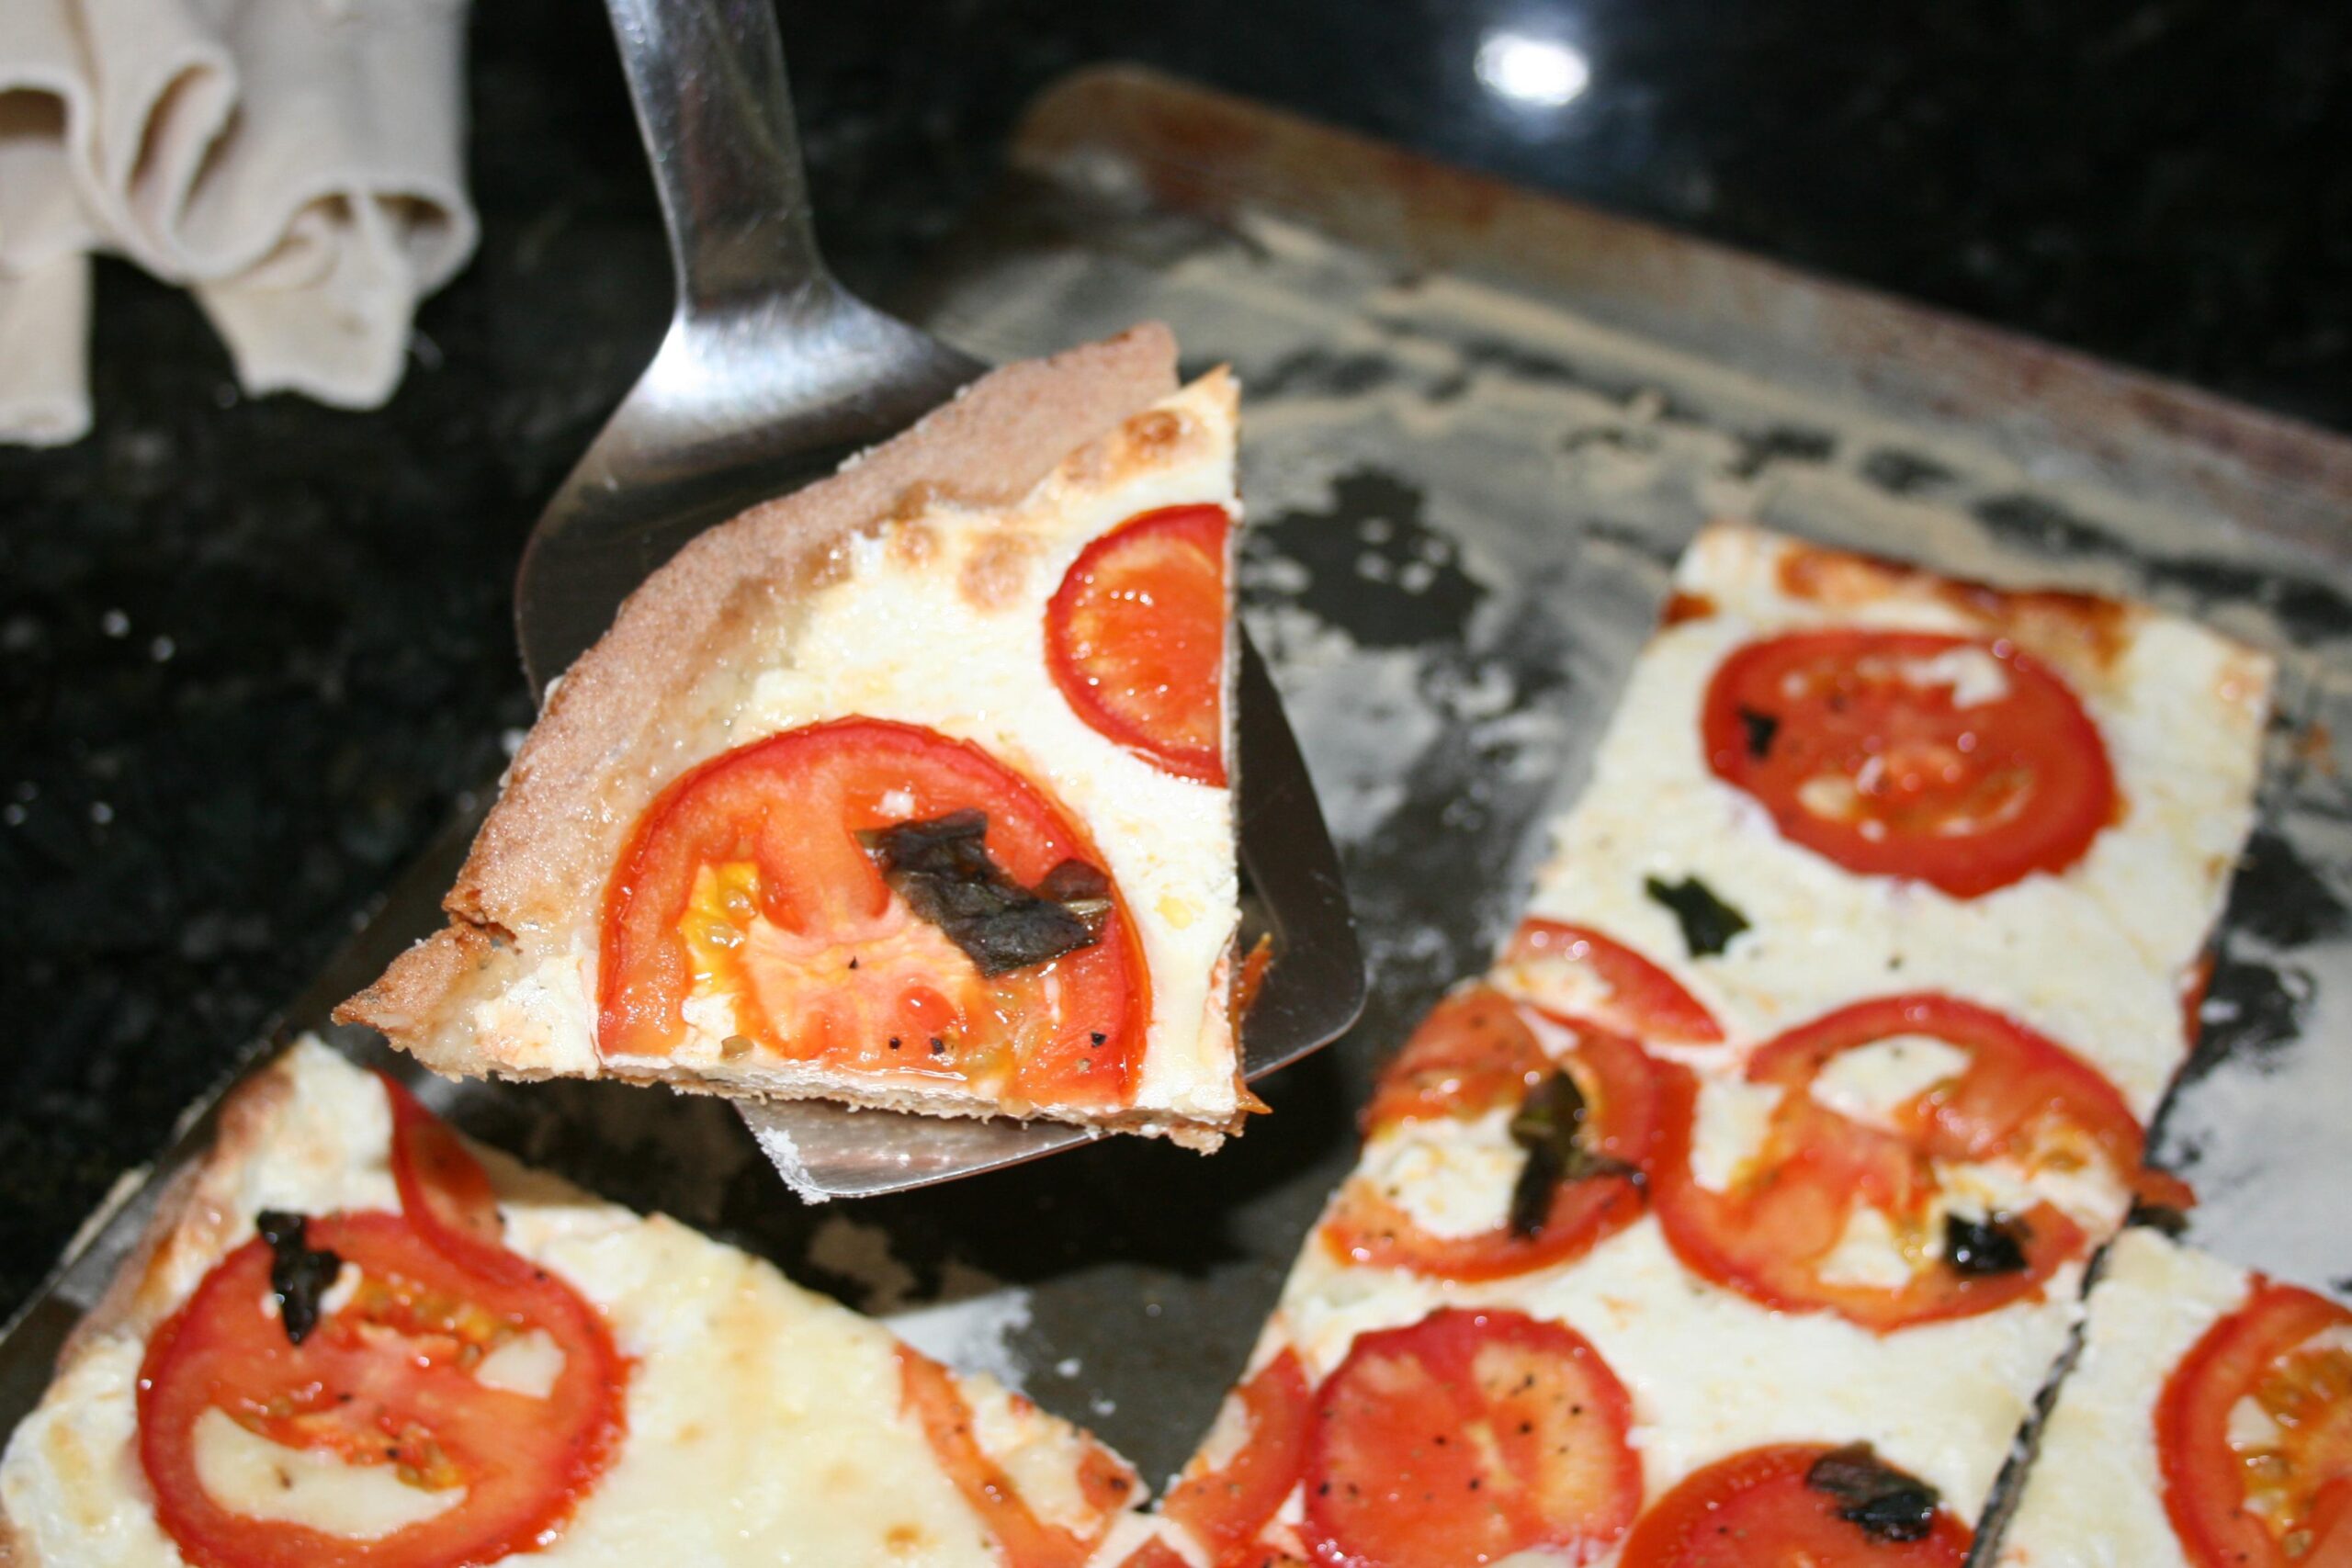  A classic pizza with a healthy twist.